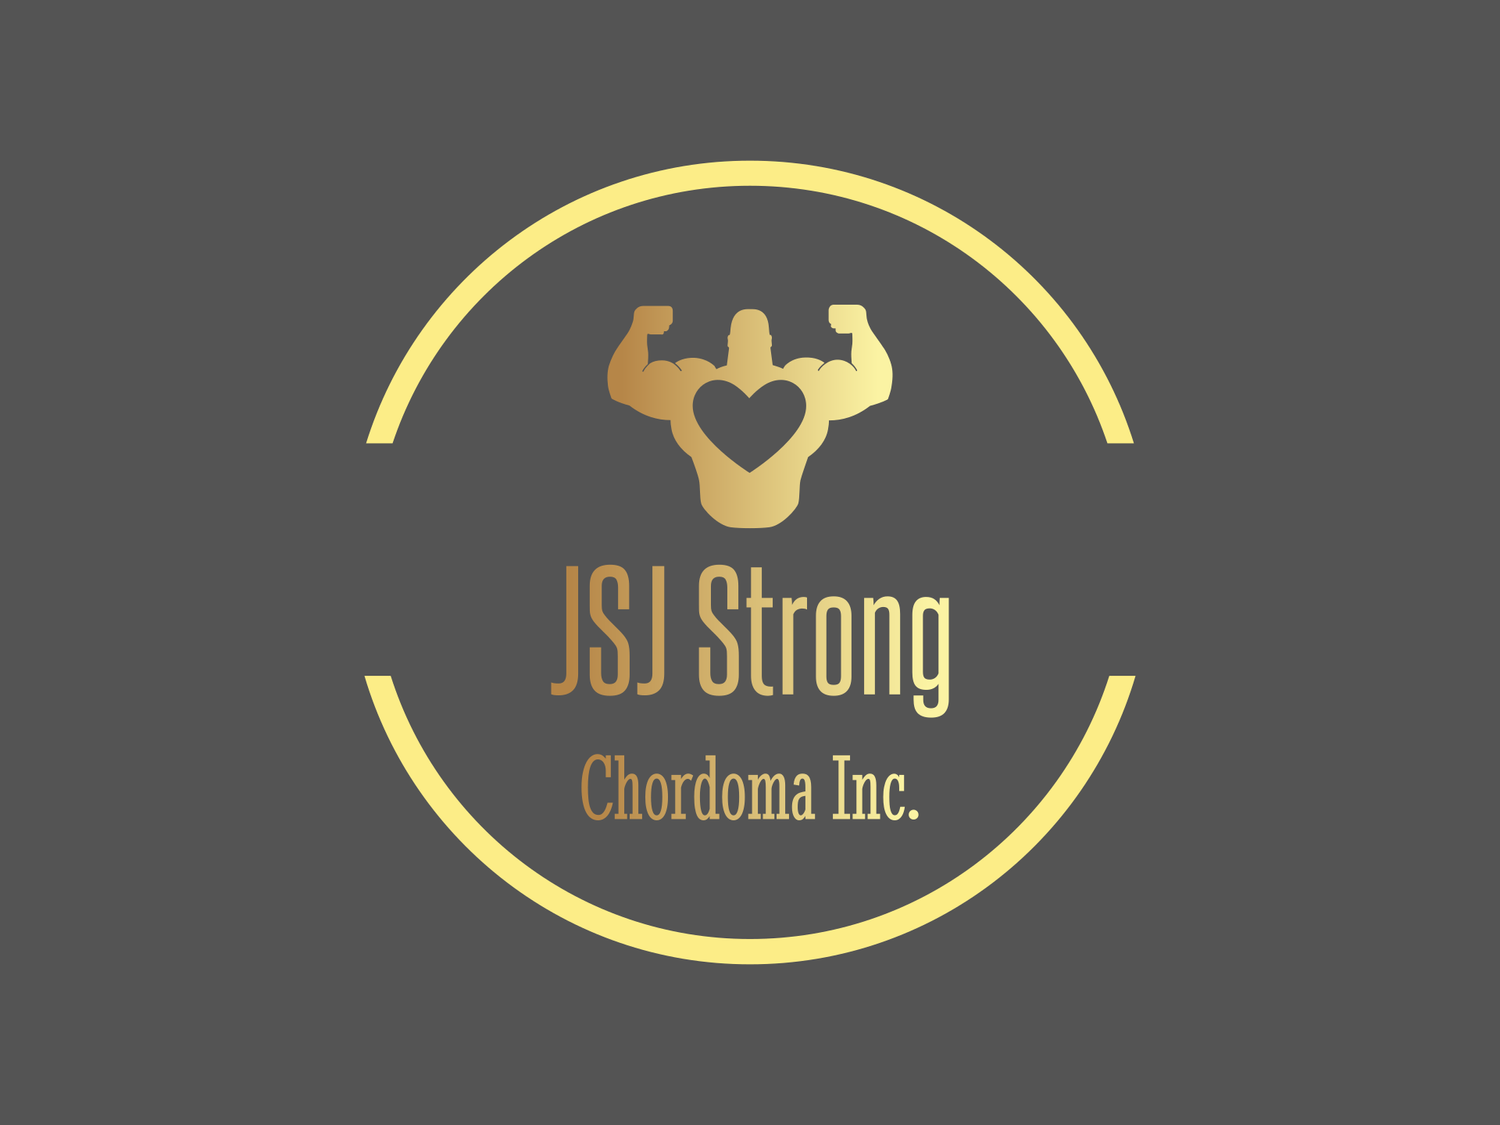 JSJ Strong Chordoma Incorporated